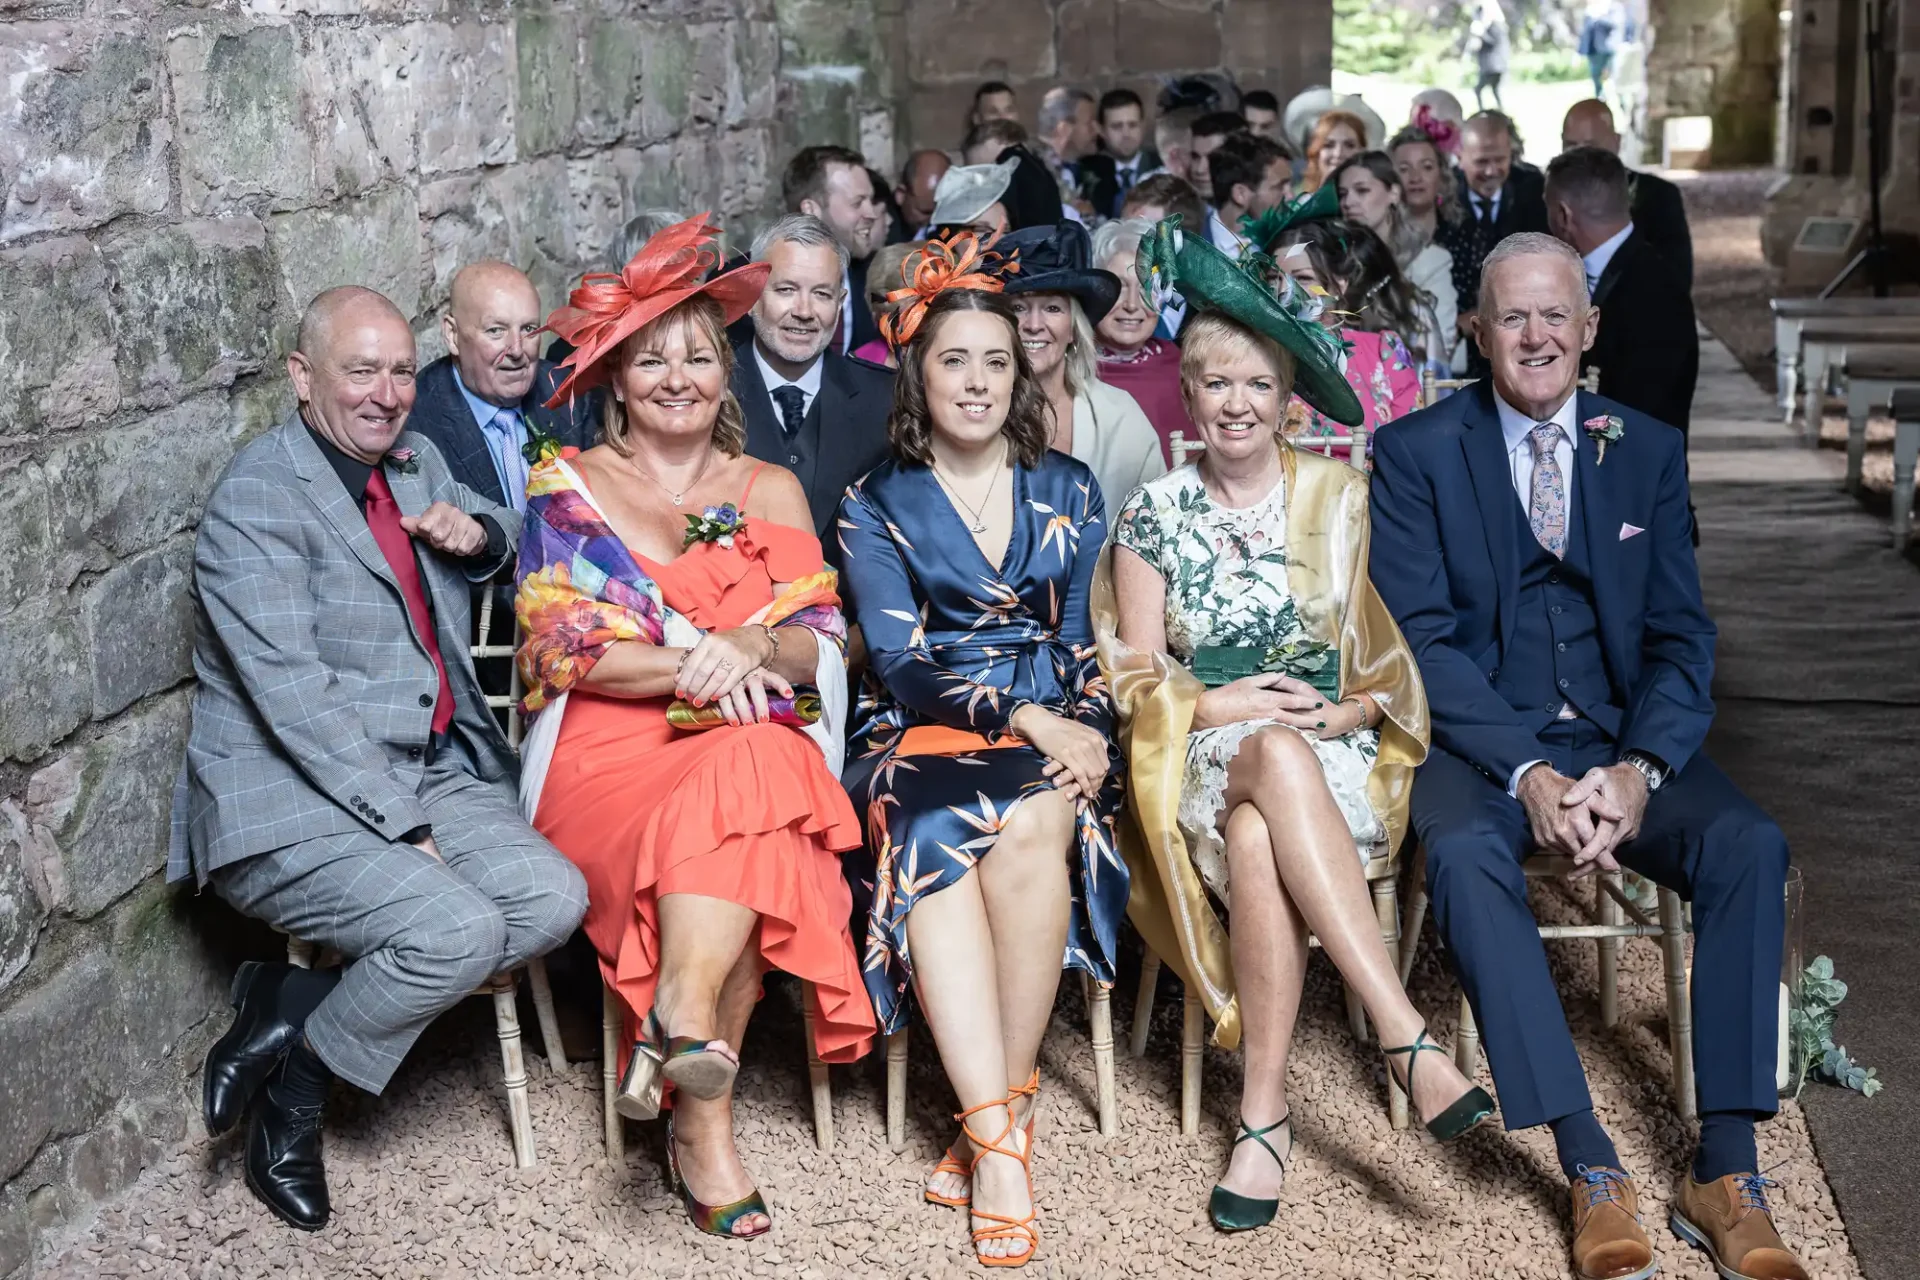 A group of elegantly dressed guests, some wearing elaborate hats, seated together at a wedding ceremony in a stone-walled venue.